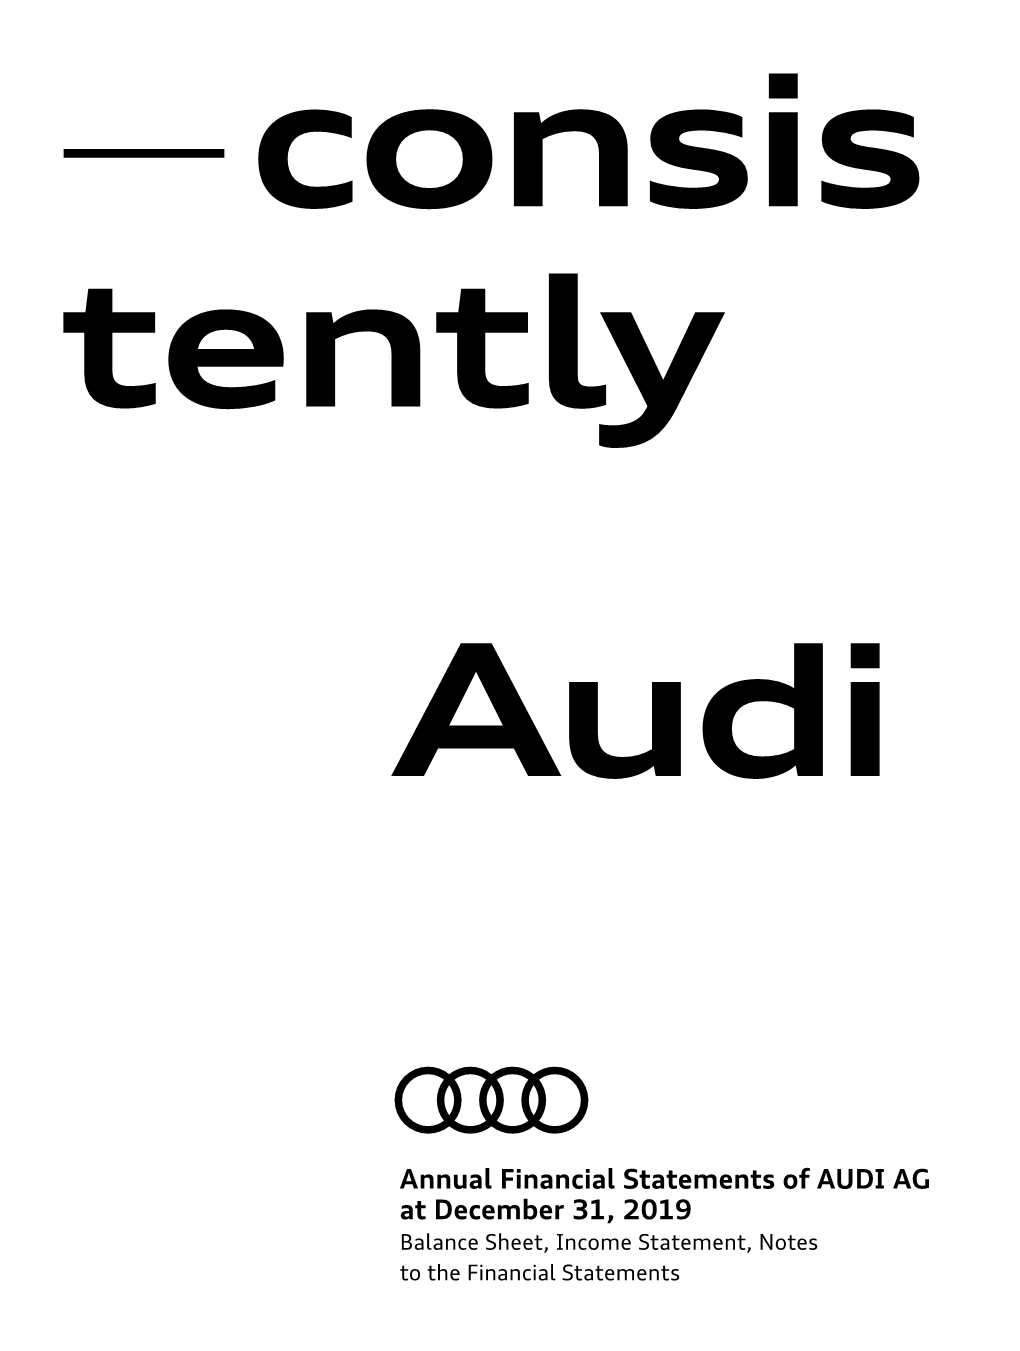 Annual Financial Statements of AUDI AG at December 31, 2019 Balance Sheet, Income Statement, Notes to the Financial Statements